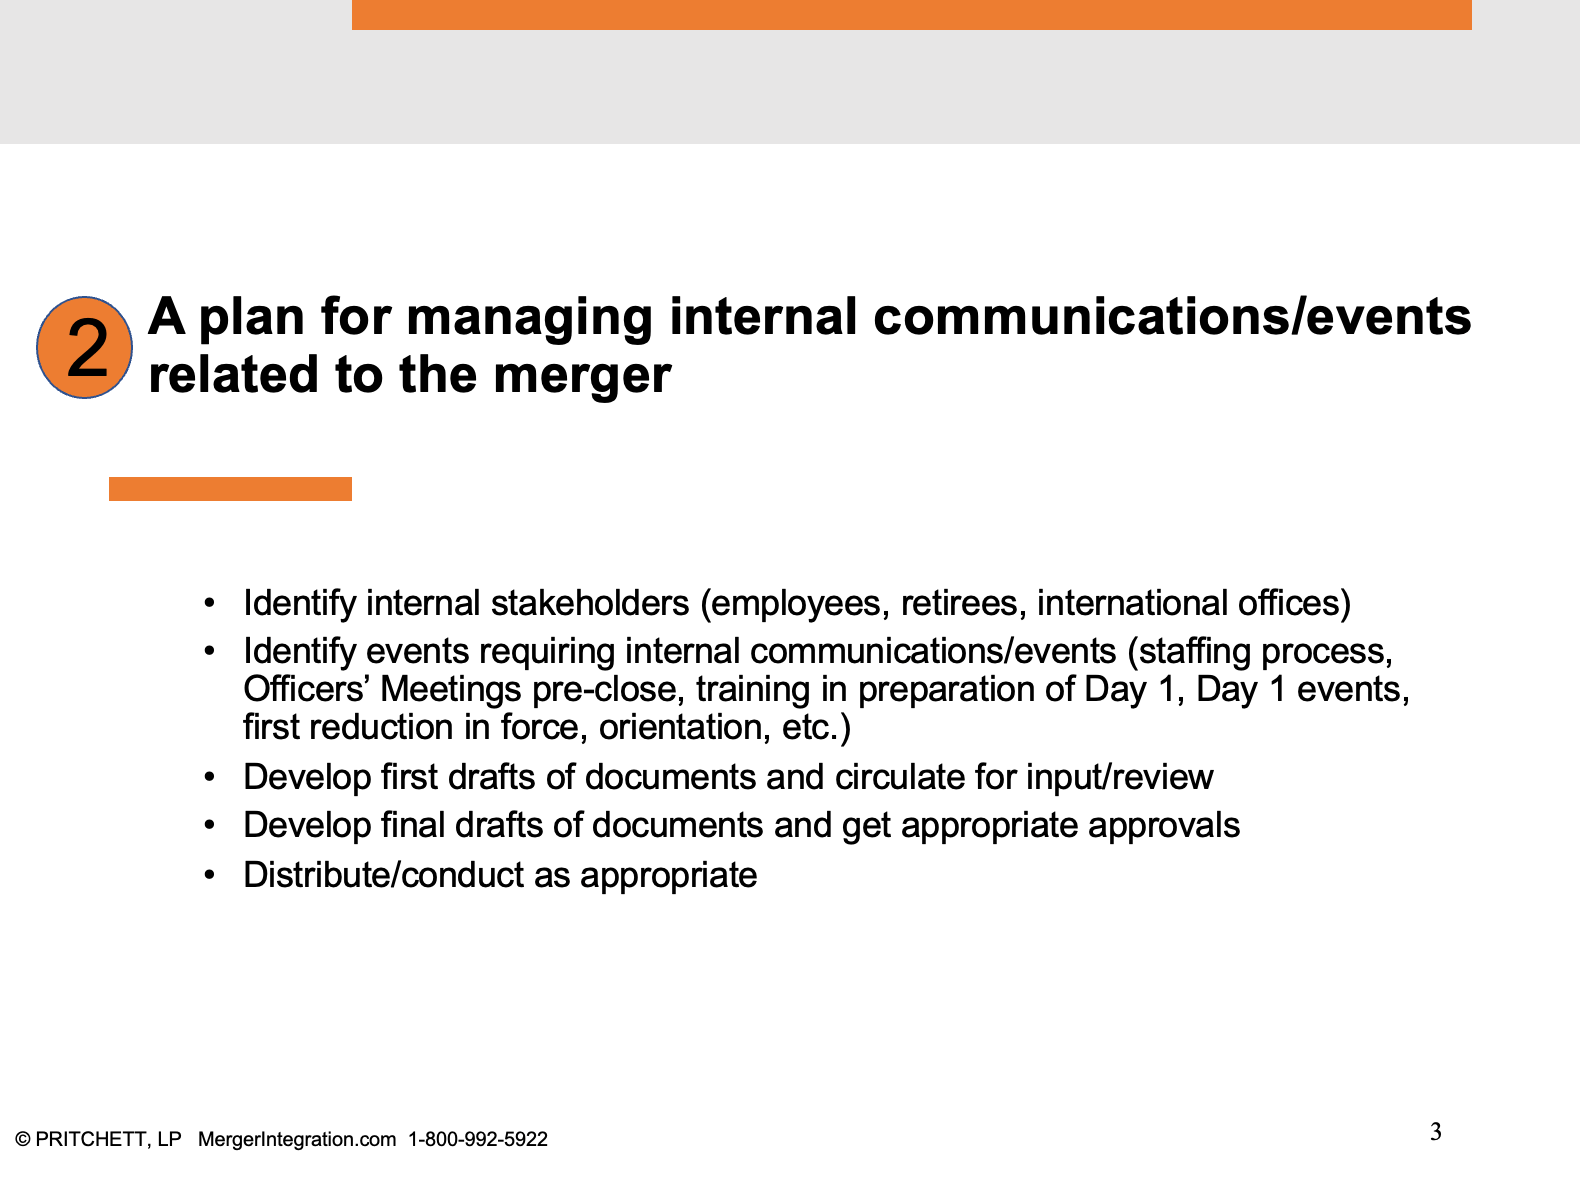 A plan for managing internal communications/events related to the merger